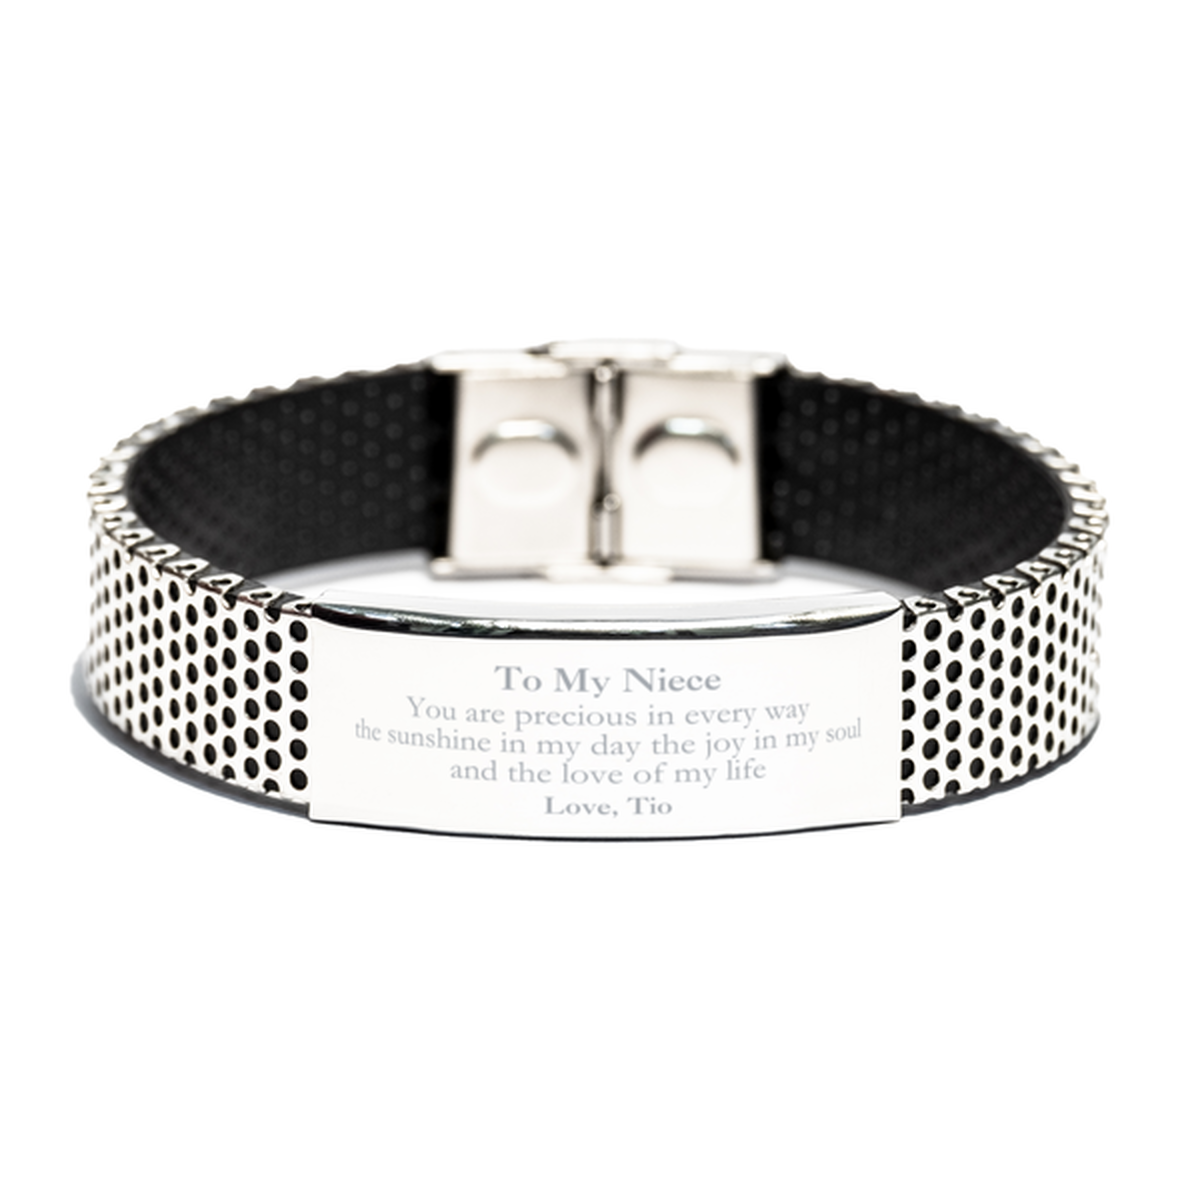 Graduation Gifts for Niece Stainless Steel Bracelet Present from Tio, Christmas Niece Birthday Gifts Niece You are precious in every way the sunshine in my day. Love, Tio